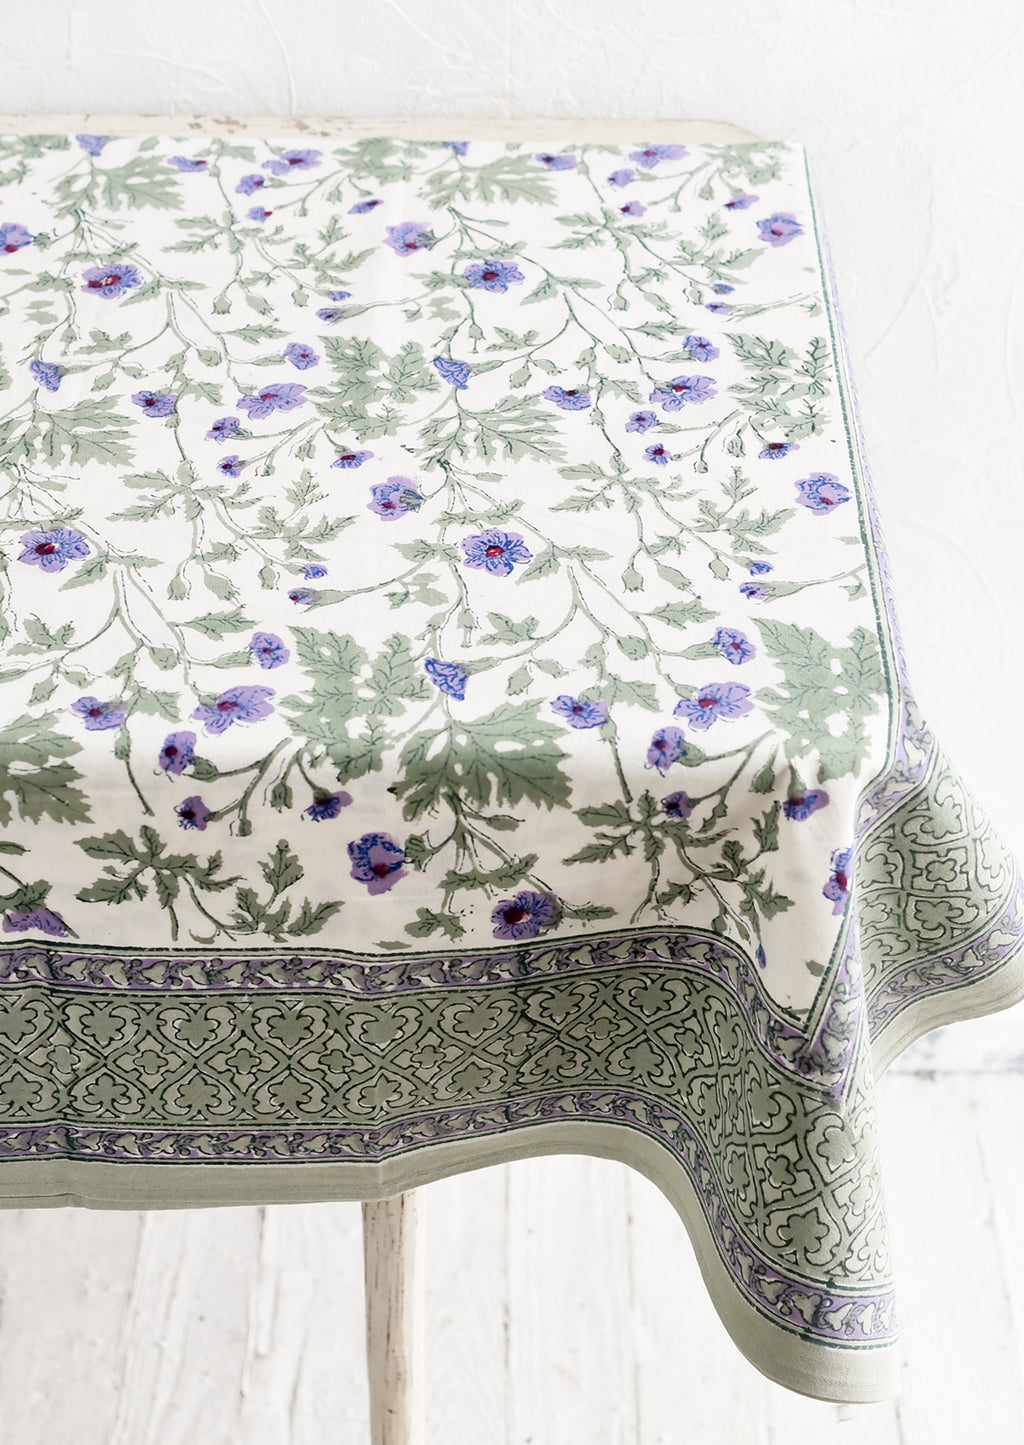 2: A block printed floral tablecloth in purple and green floral.